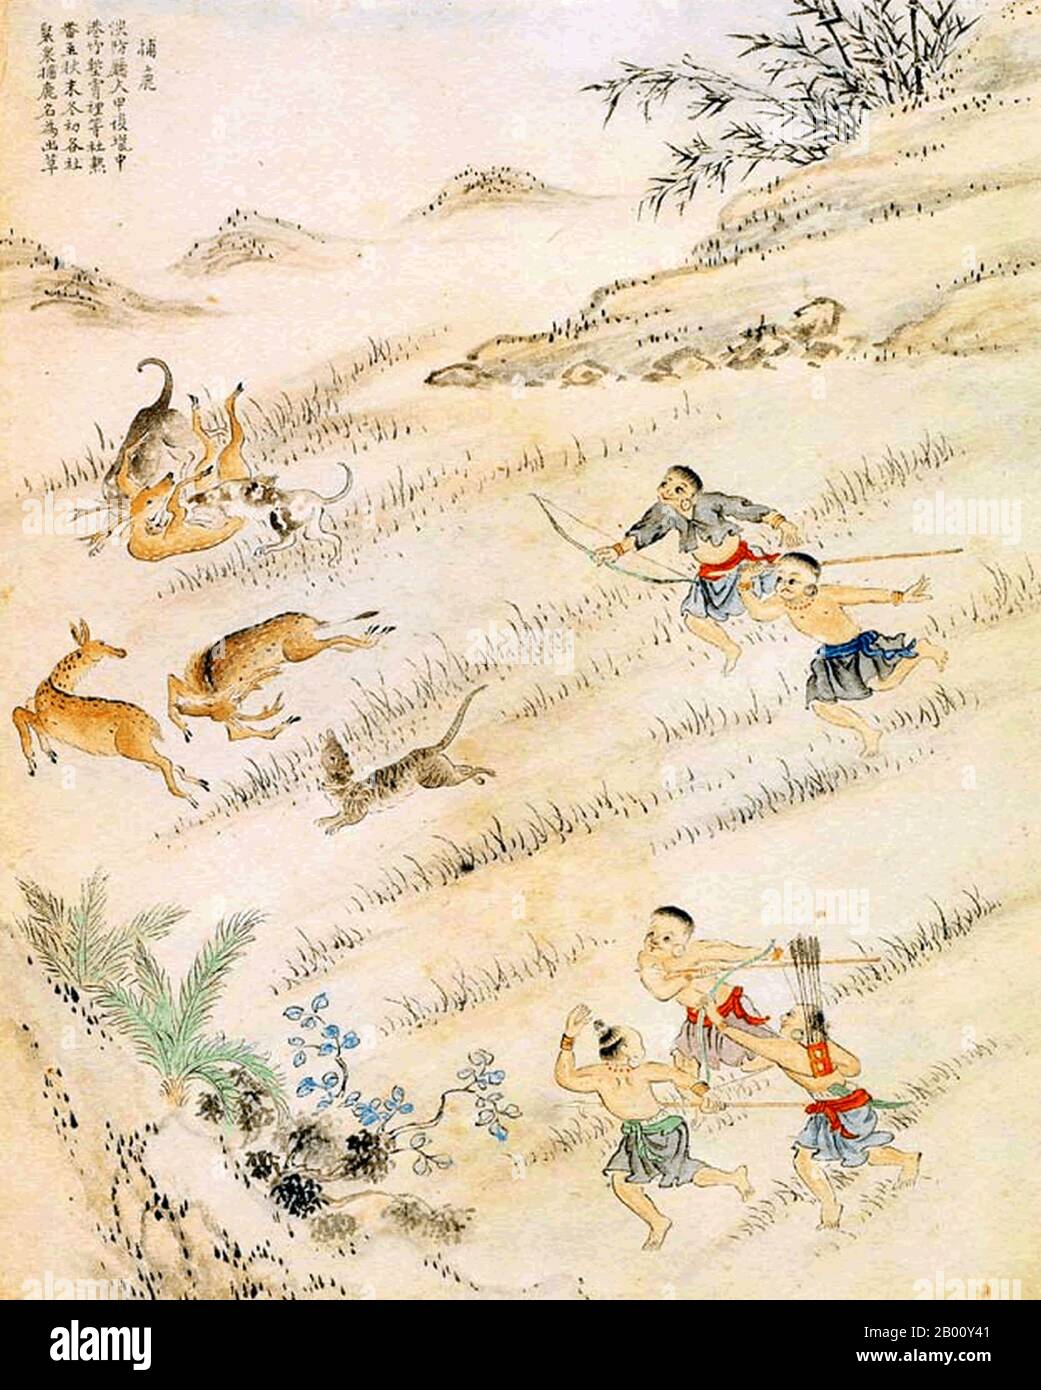 China/Taiwan: Aboriginal people hunting deer, c. 1750.  Taiwanese aborigines (Chinese: yuánzhùmín; Pe̍h-ōe-jī: gôan-chū-bîn; literally 'original inhabitants') may have been living on the islands for approximately 8,000 years before major Han Chinese immigration began in the 17th century. Taiwanese aborigines are Austronesian peoples, with linguistic and genetic ties to other Austronesian ethnic groups, such as peoples of the Philippines, Indonesia and Oceania. For centuries, Taiwan's aboriginal peoples experienced economic competition and military conflict with a series of colonising peoples. Stock Photo